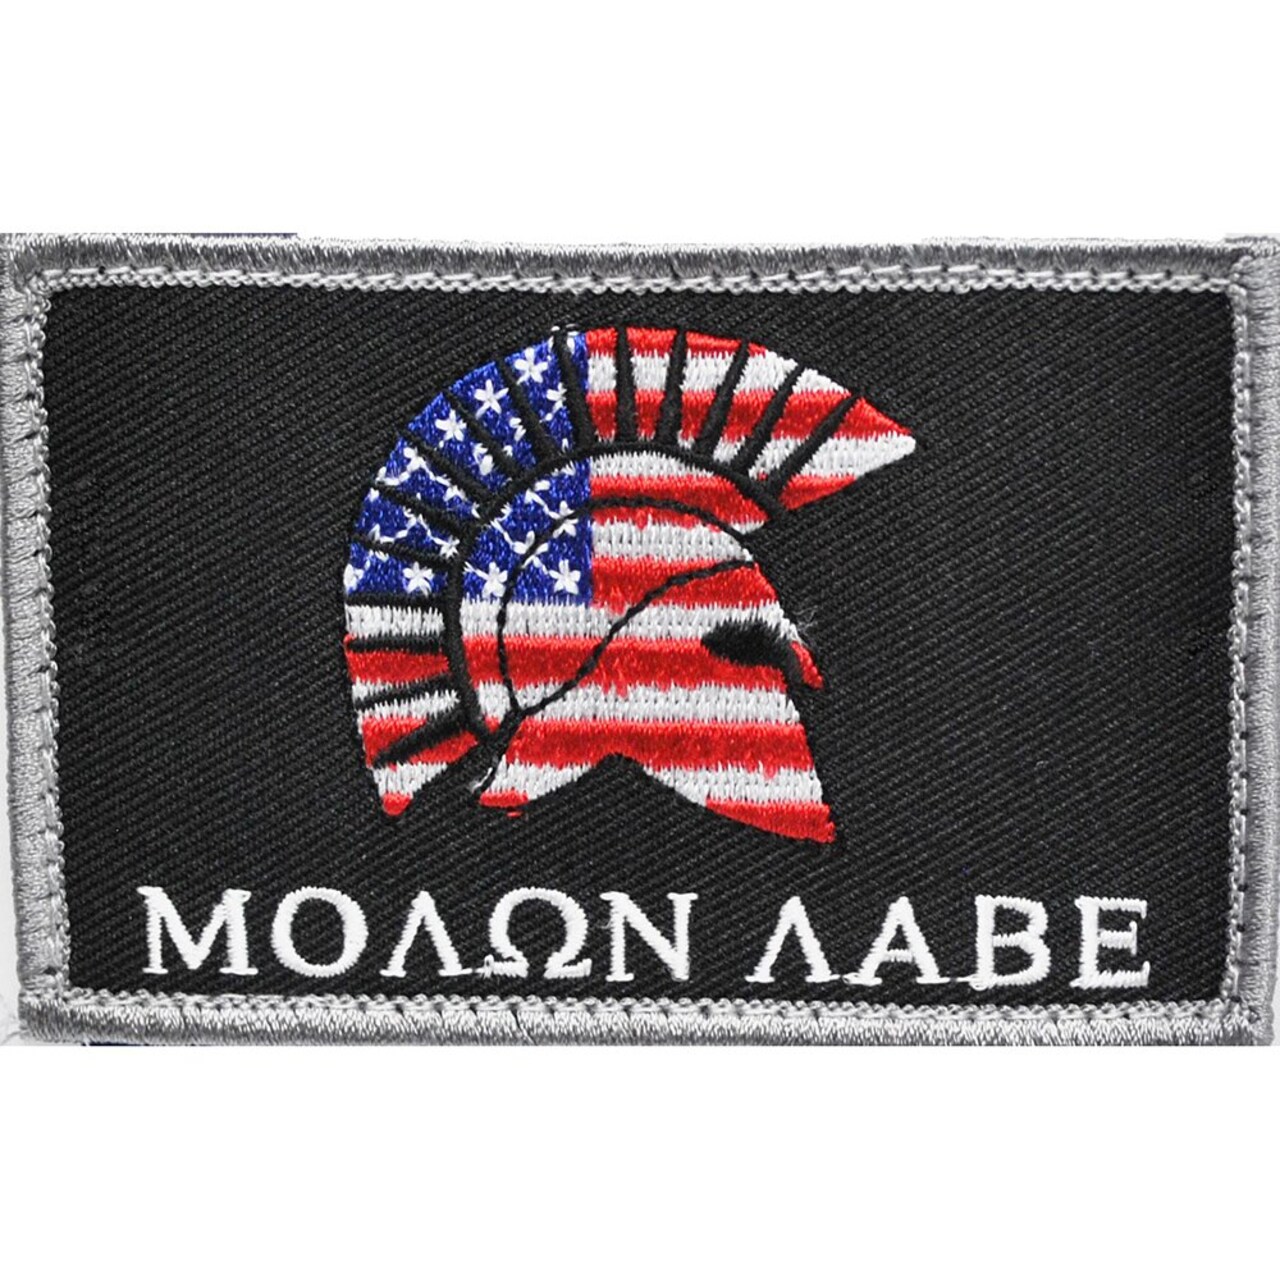 Molon Labe Come and Take Them Spartan Helmet Hook and Loop Patch 3.5